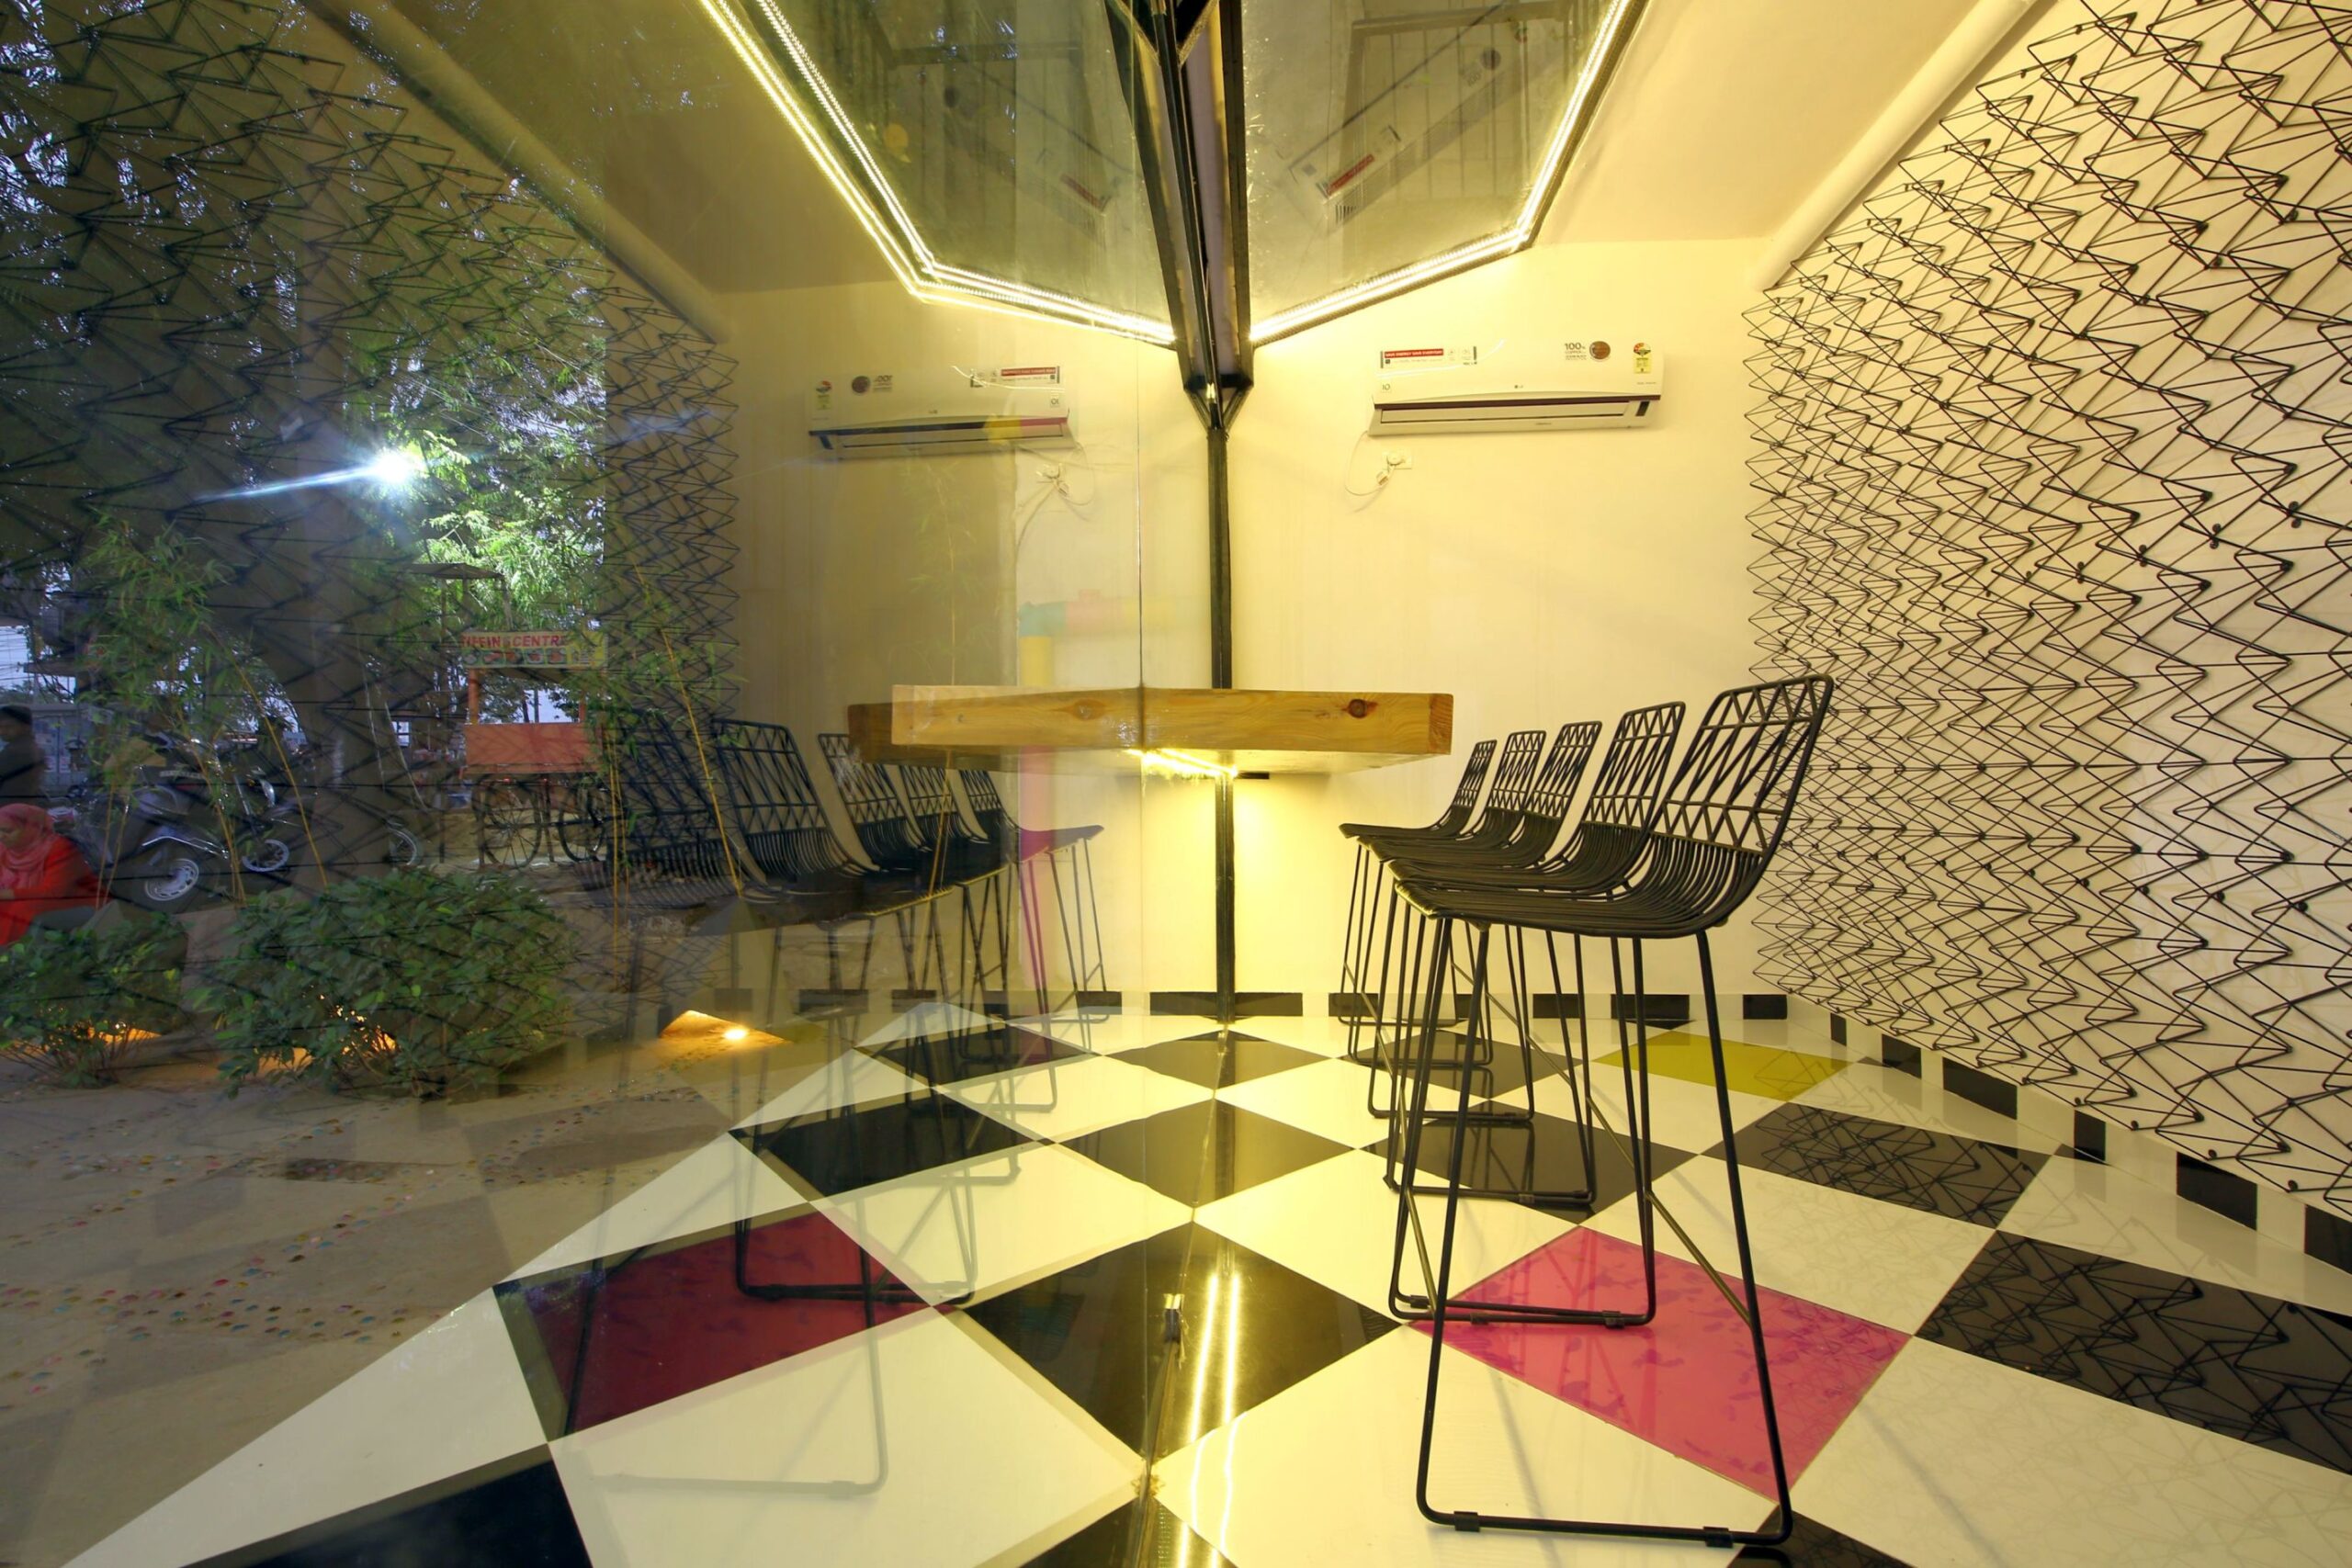 Rewind (Melting Moments), an ice cream parlour, in Hyderabad, by DesignAware 59